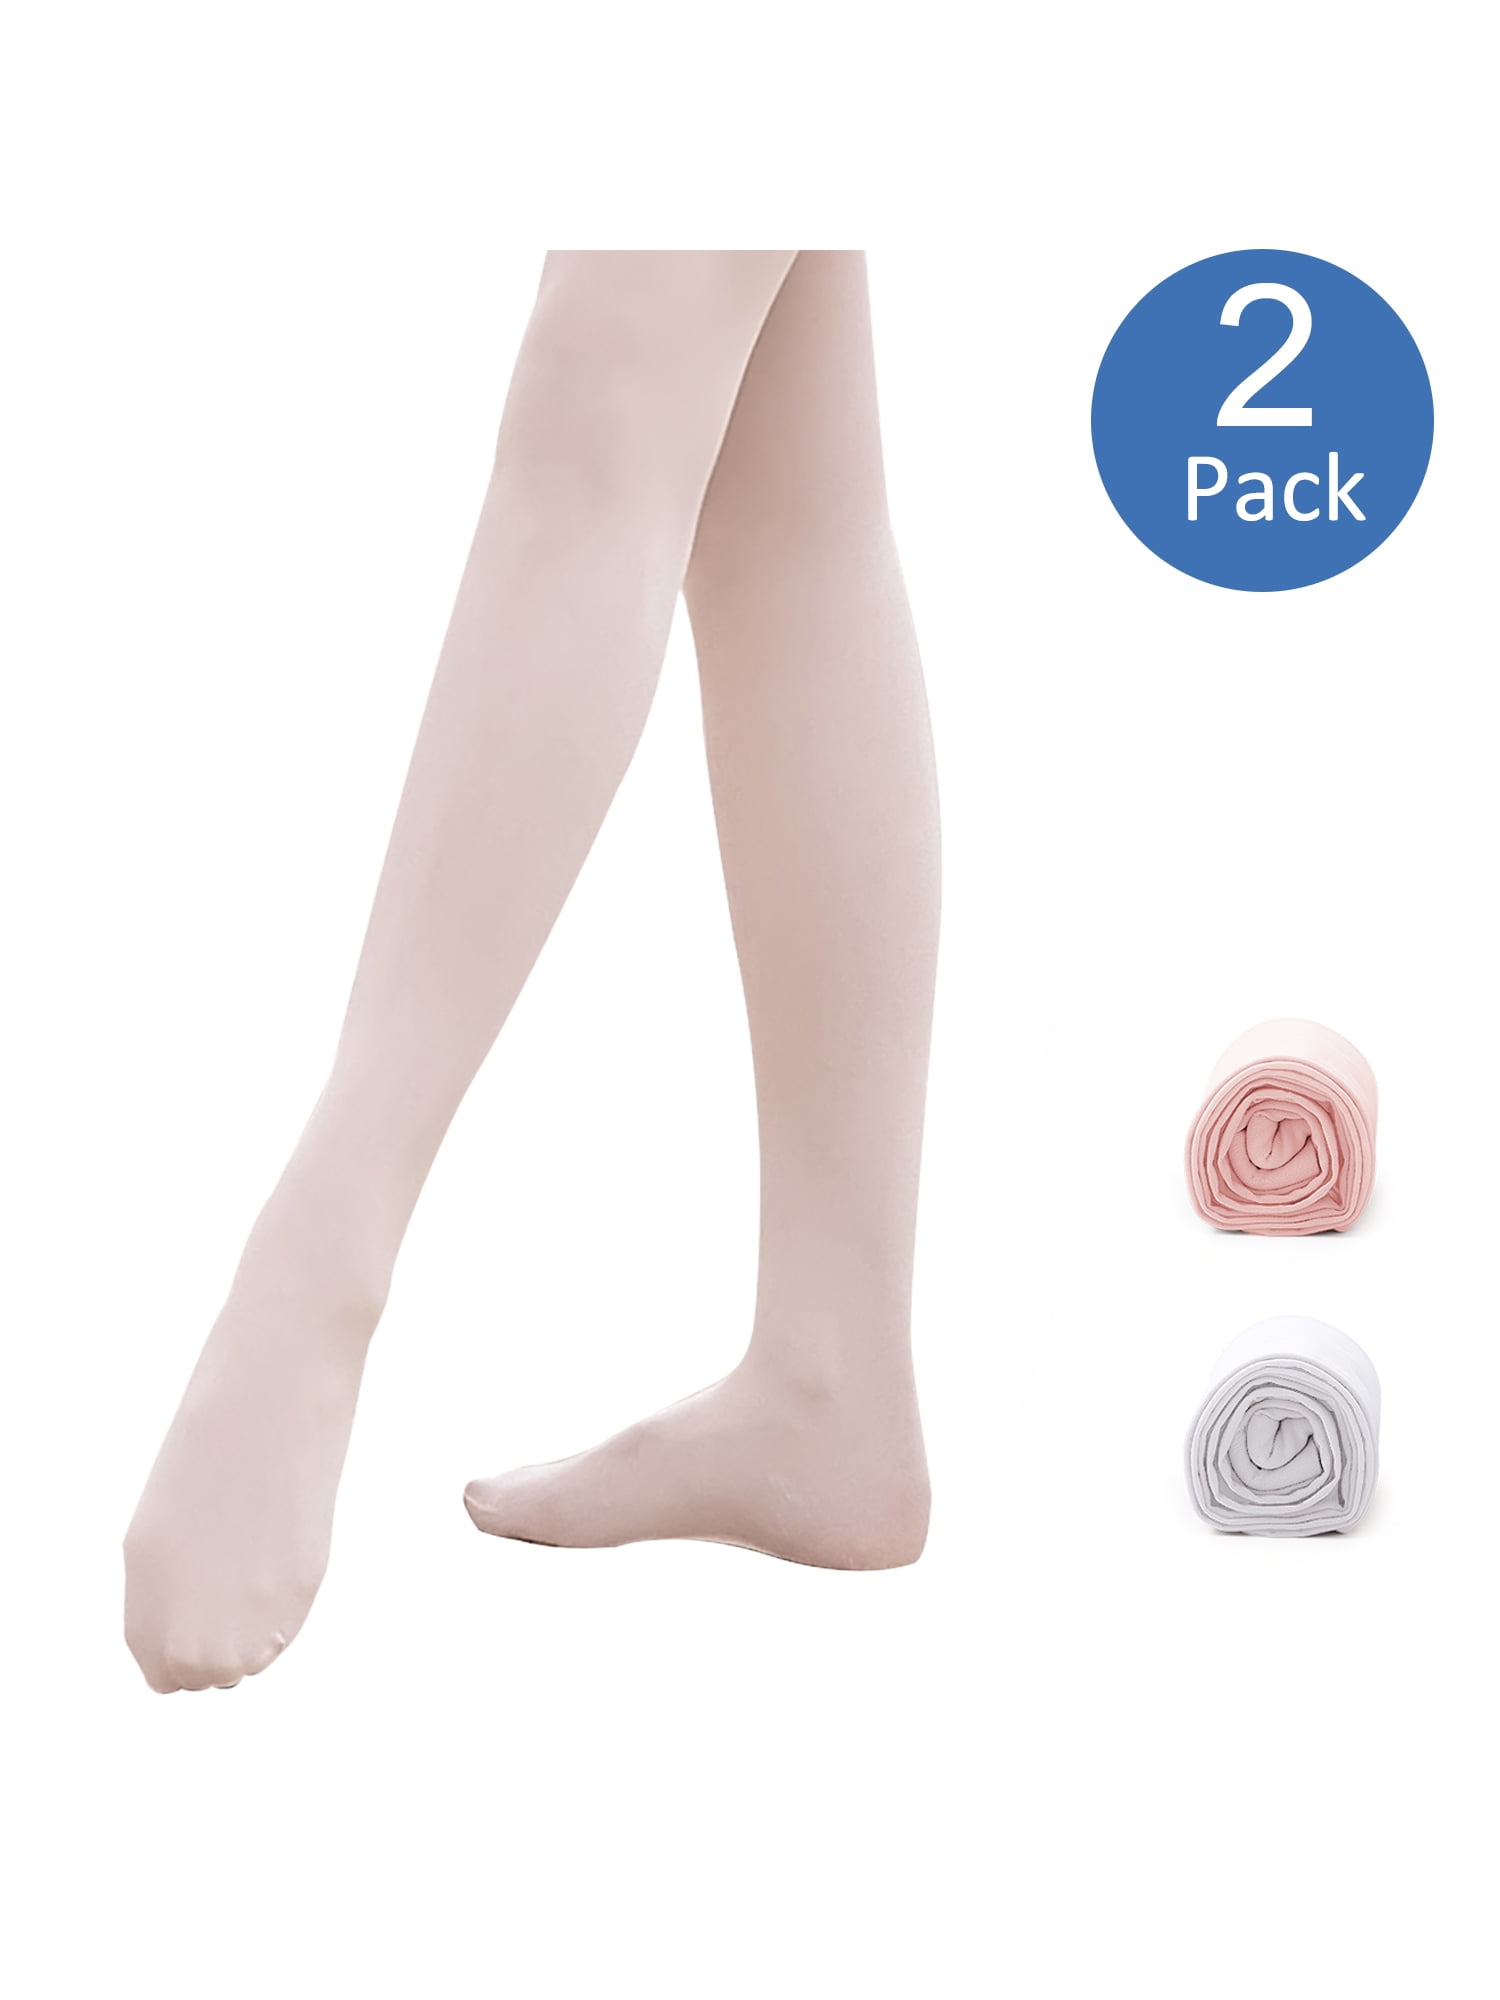 STELLE Ultra Soft Professional Ballet Dance Footed Tights for Girls Little Kids Toddlers